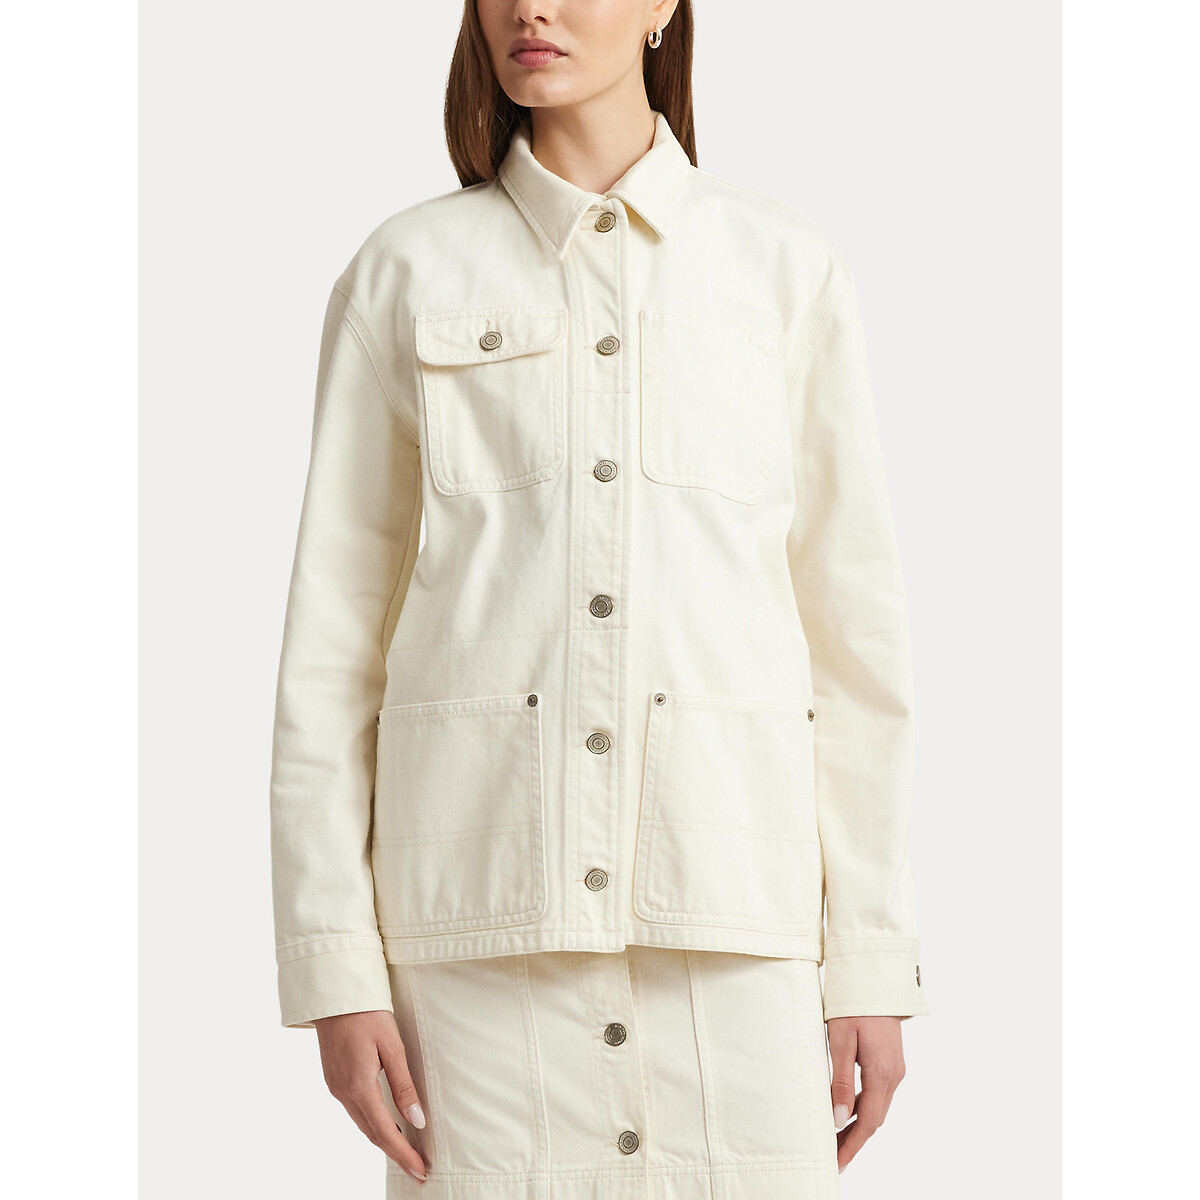 Image of Caitmier Cotton Buttoned Jacket in a Straight Fit